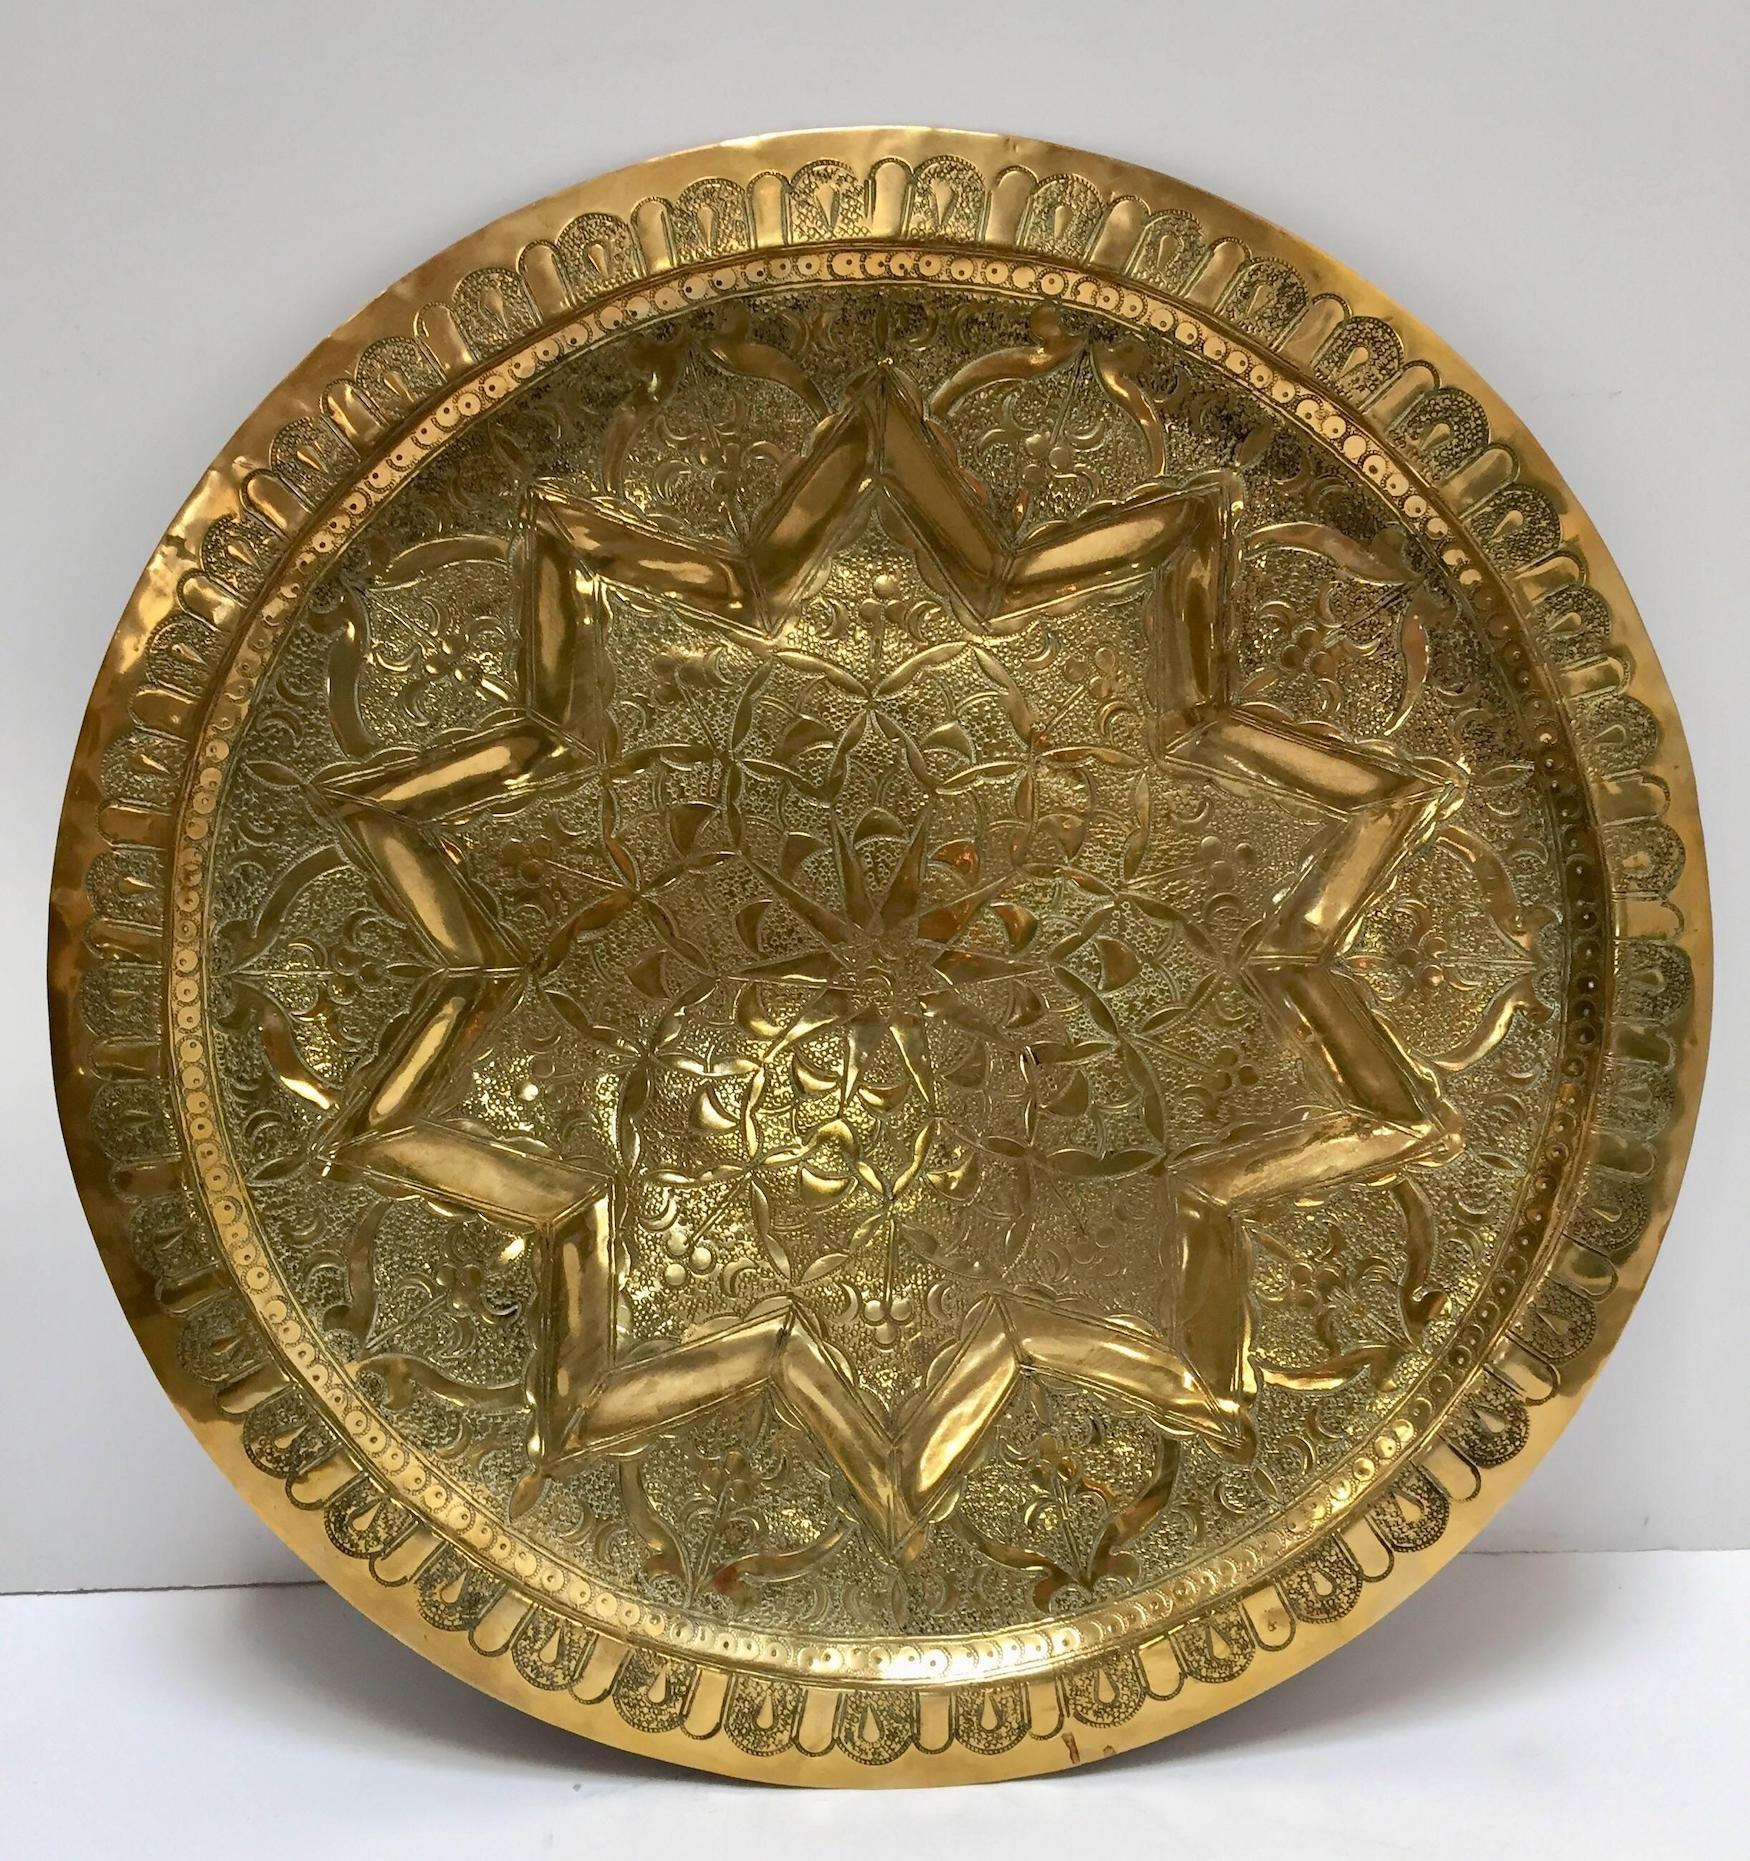 Middle Eastern Moorish antique round brass tray. 
19th century handcrafted circular brass platter hammered with Islamic Moorish designs. 
Heavy brass with fine floral and geometric designs.
Measures: Diameter 19.5